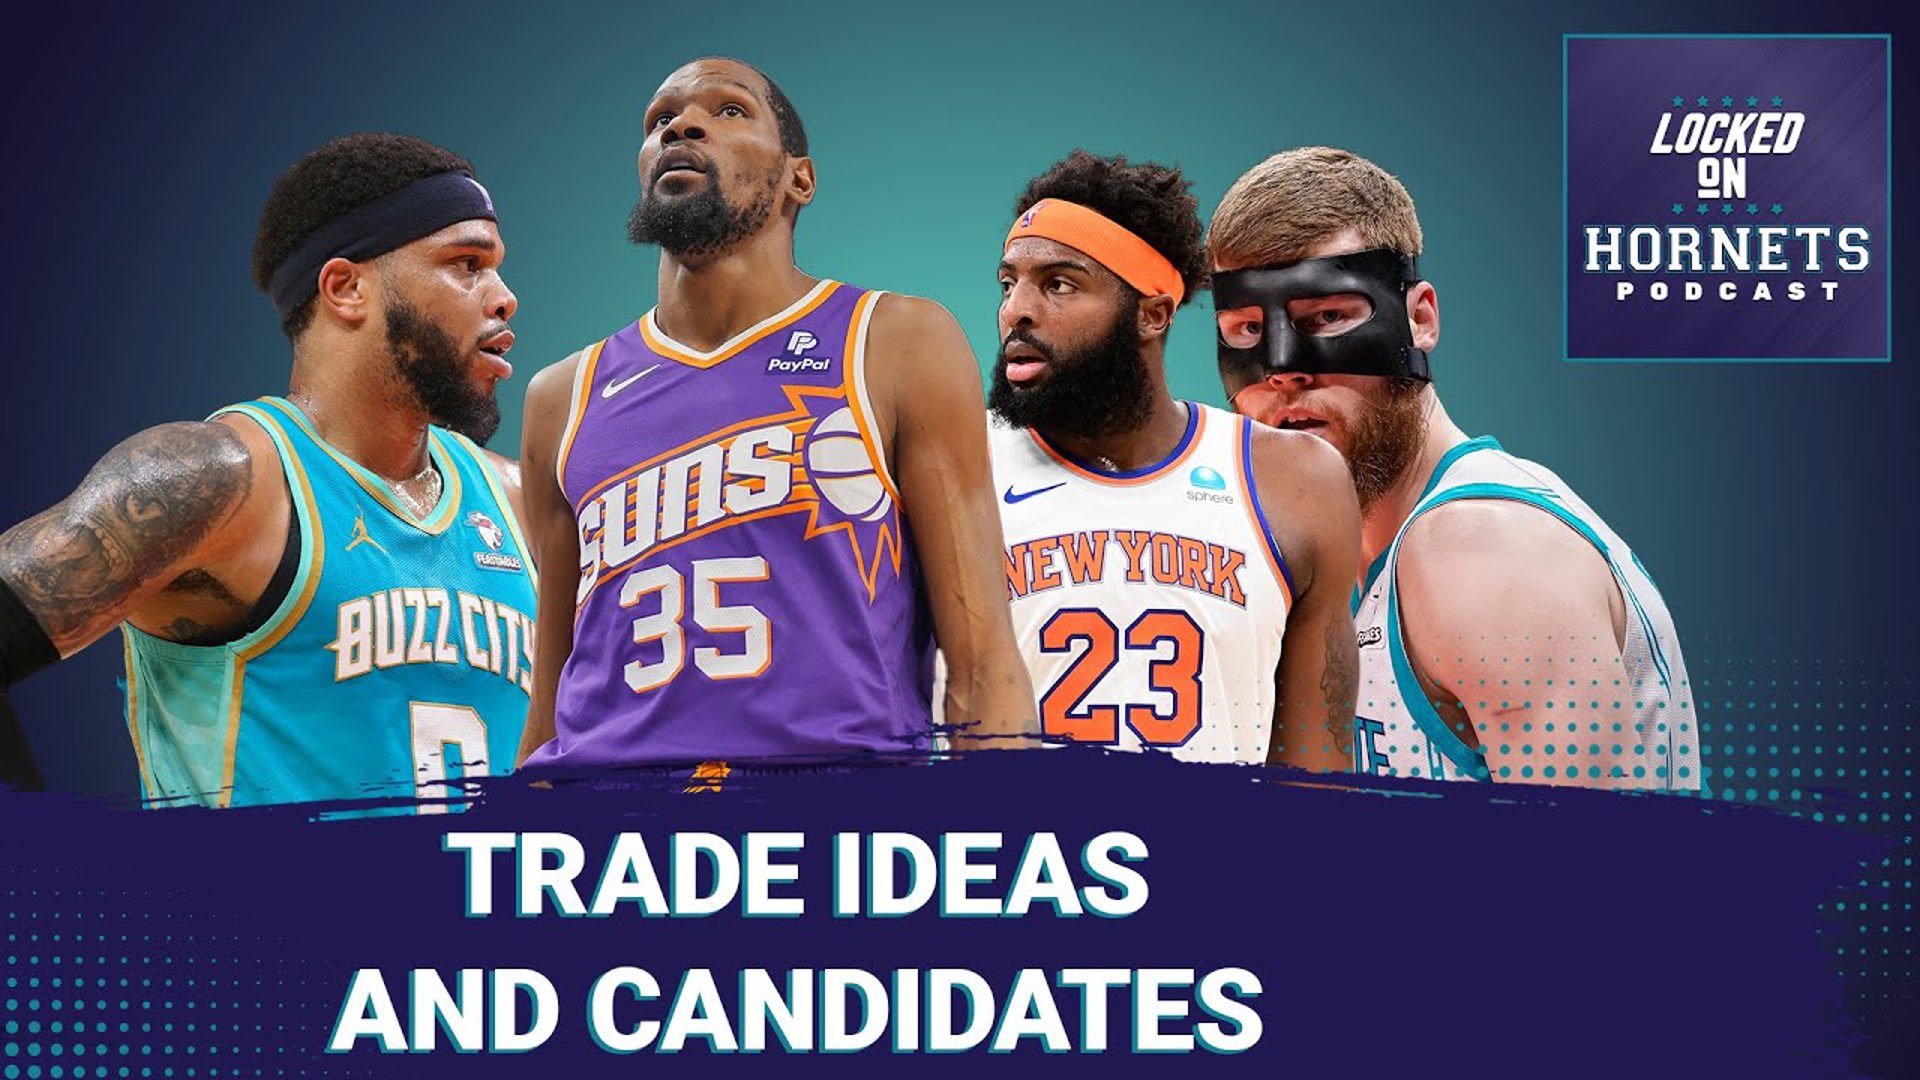 Could the Charlotte Hornets catch a falling star + the most likely trade candidates on the roster